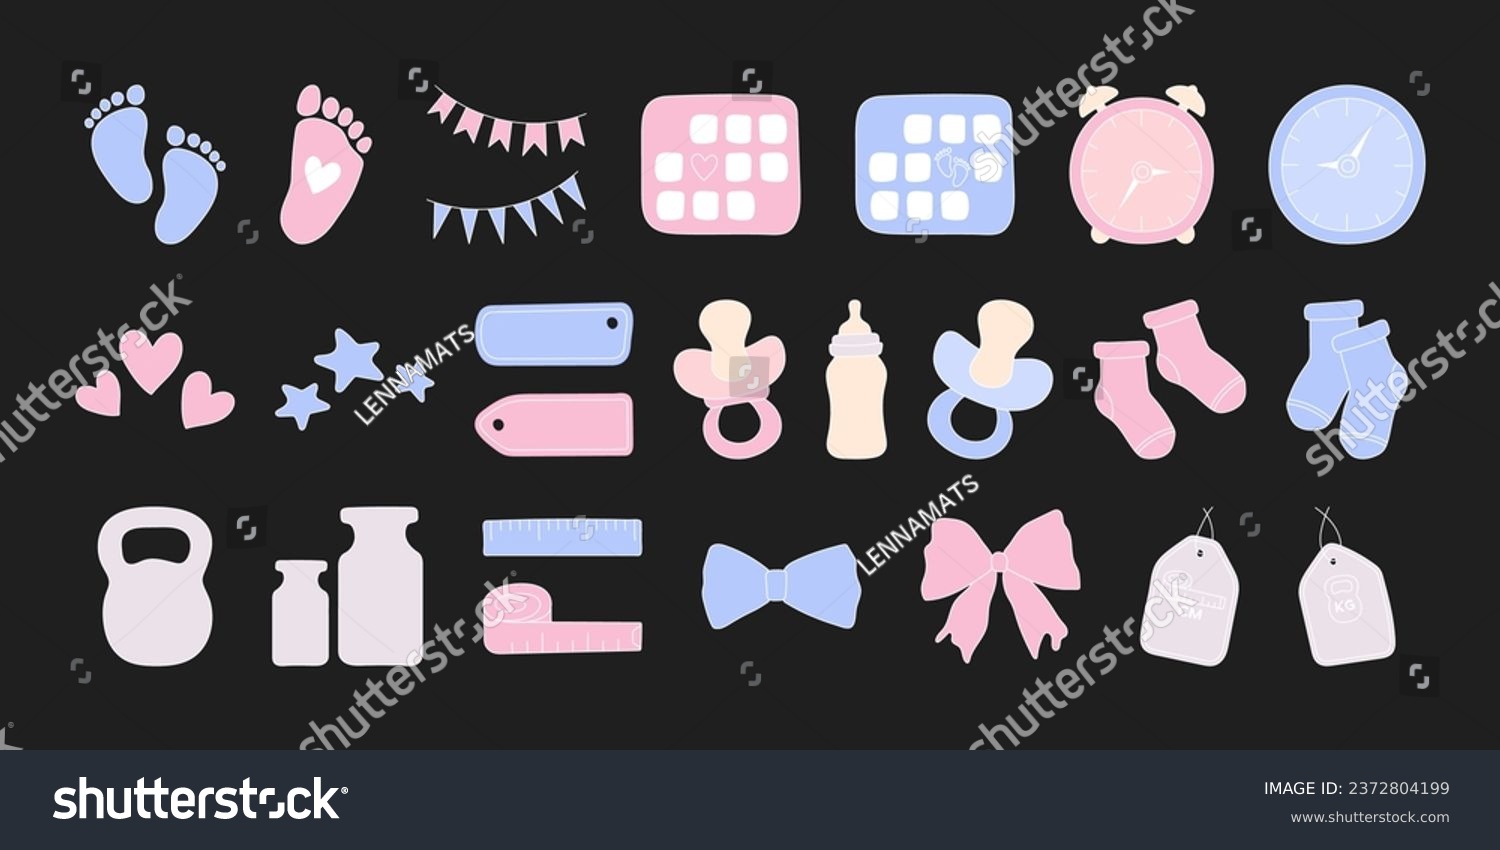 SVG of Set newborn hand drawn elements. Gender party vector icons. Birth stats colorful illustrations. Age, height, weight data and cute baby accessories. Set baby metric colored doodles. Birth announcement. svg